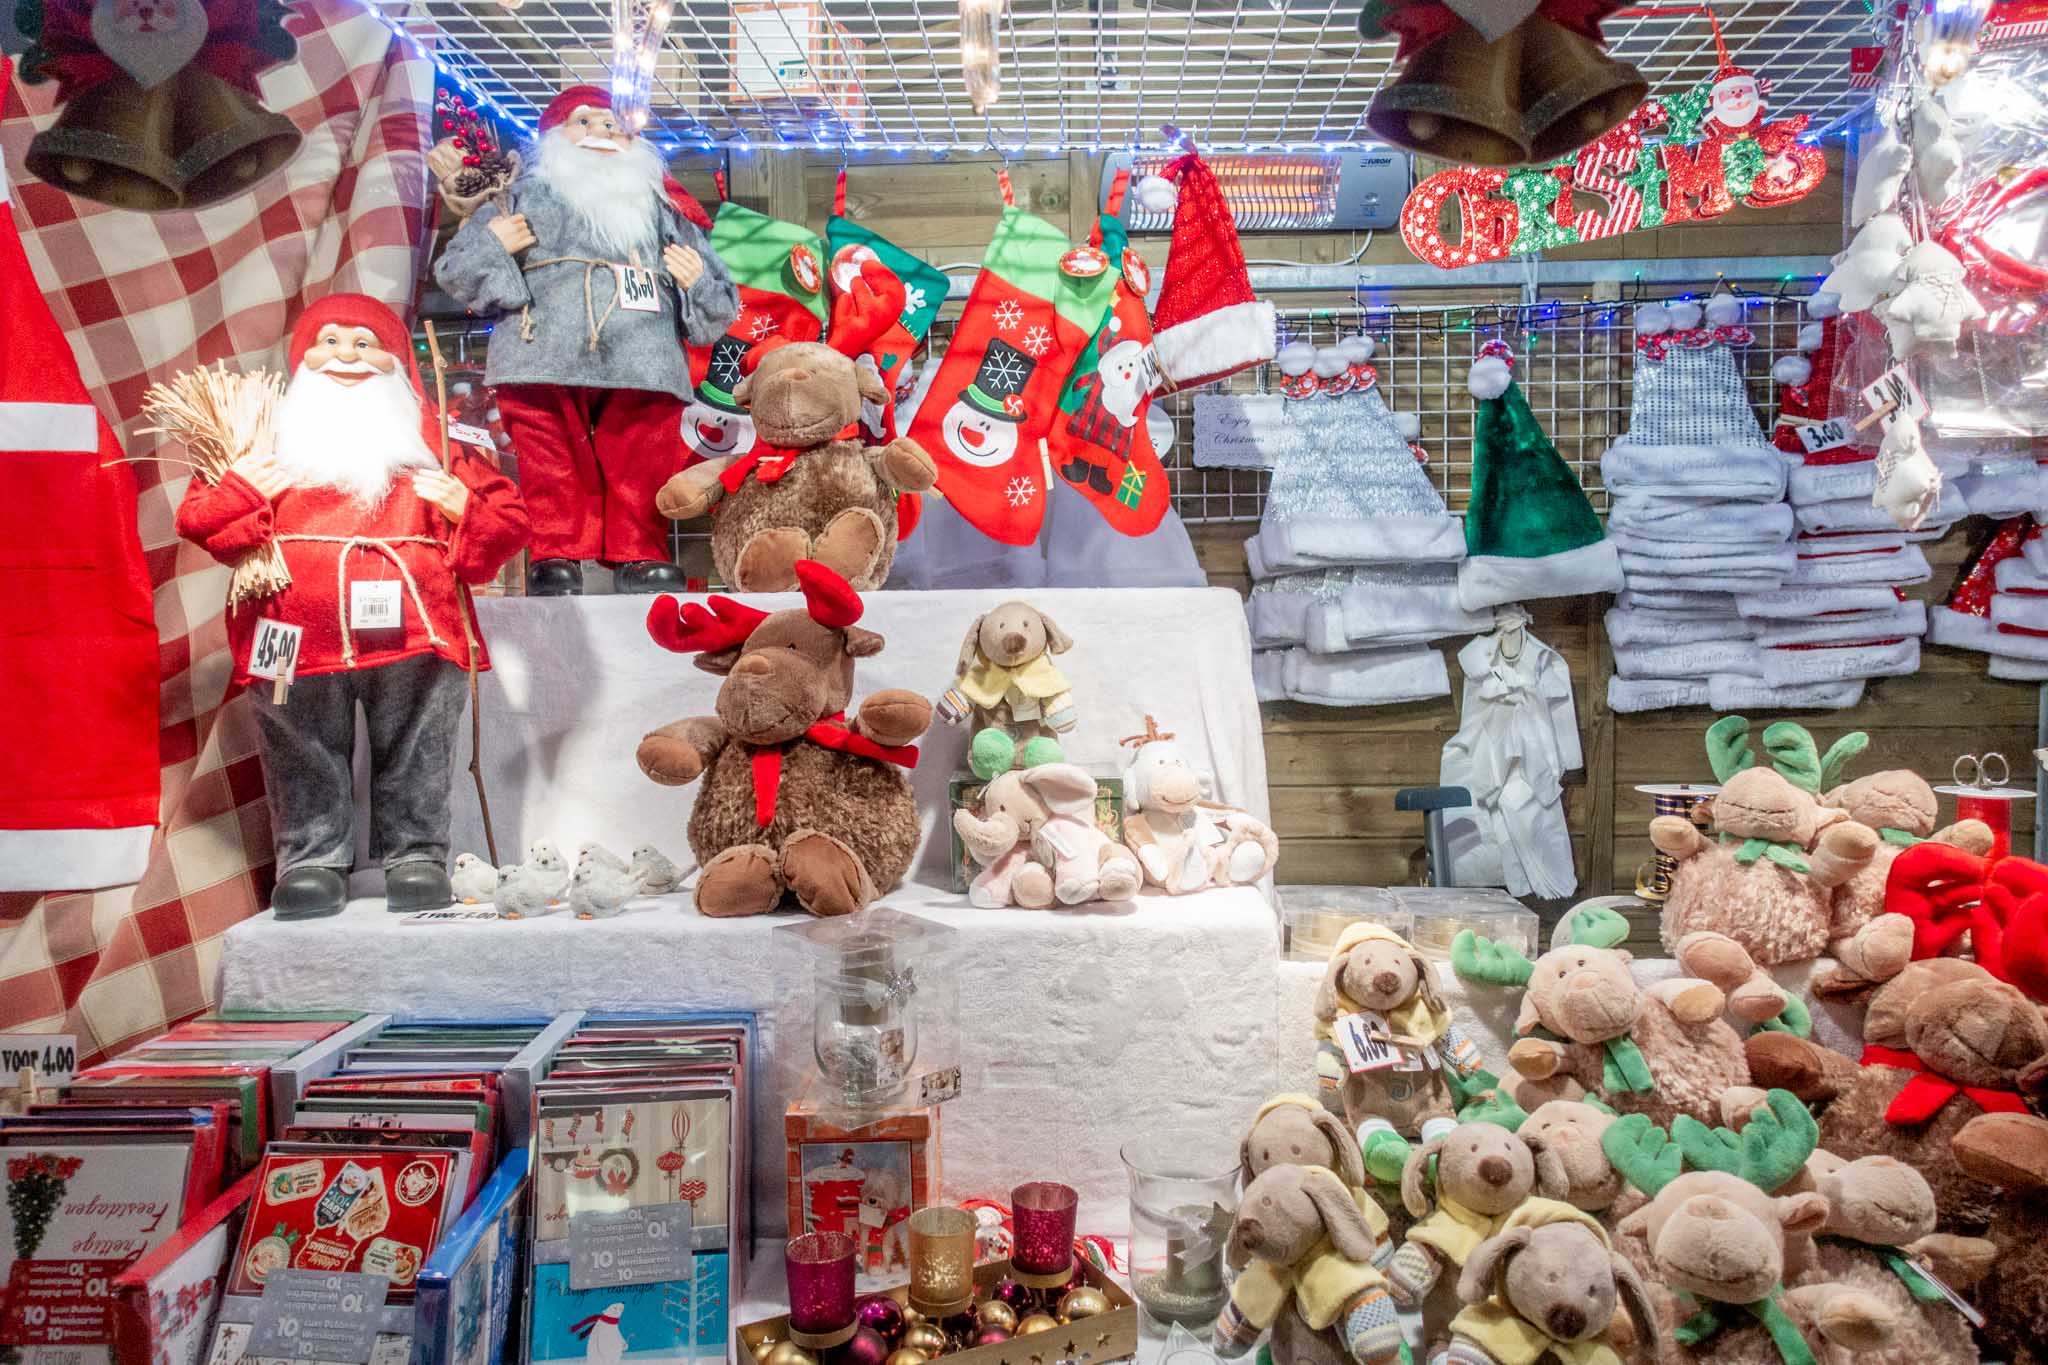 Stuffed animals, Santa hats, and other items for sale at the Bruges Xmas market